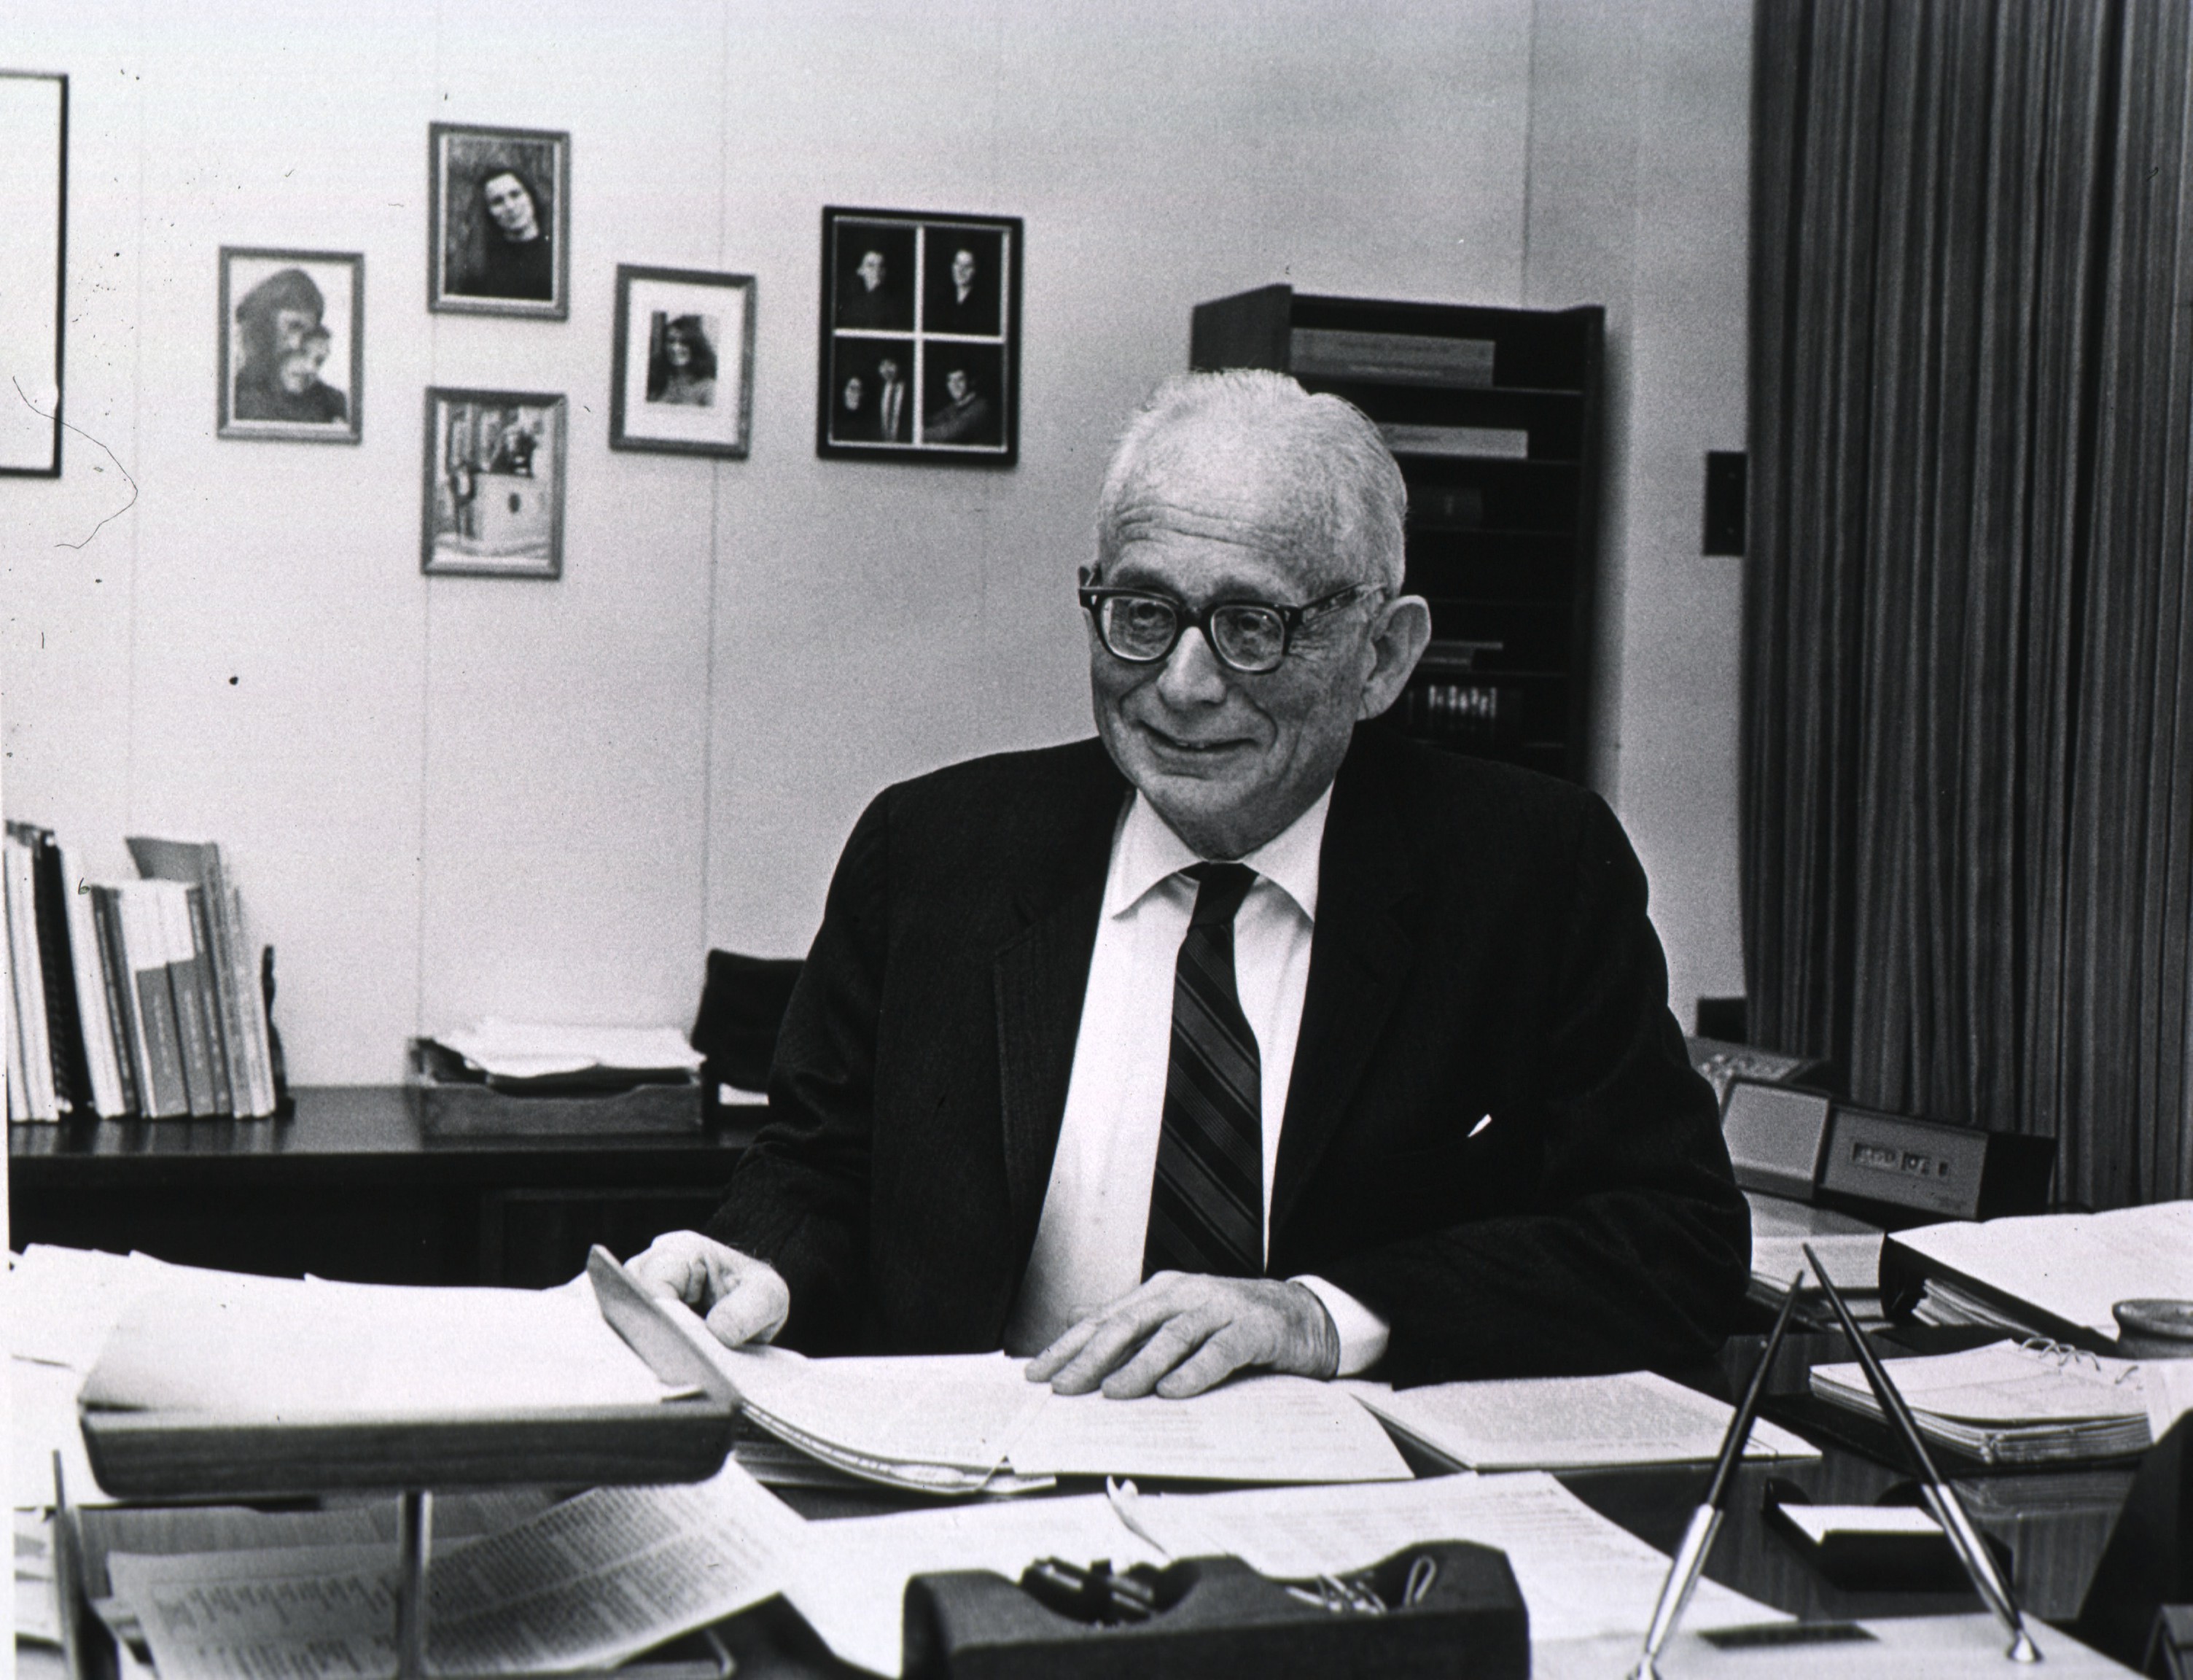 DeWitt Stetten sitting at his desk, looking to the left